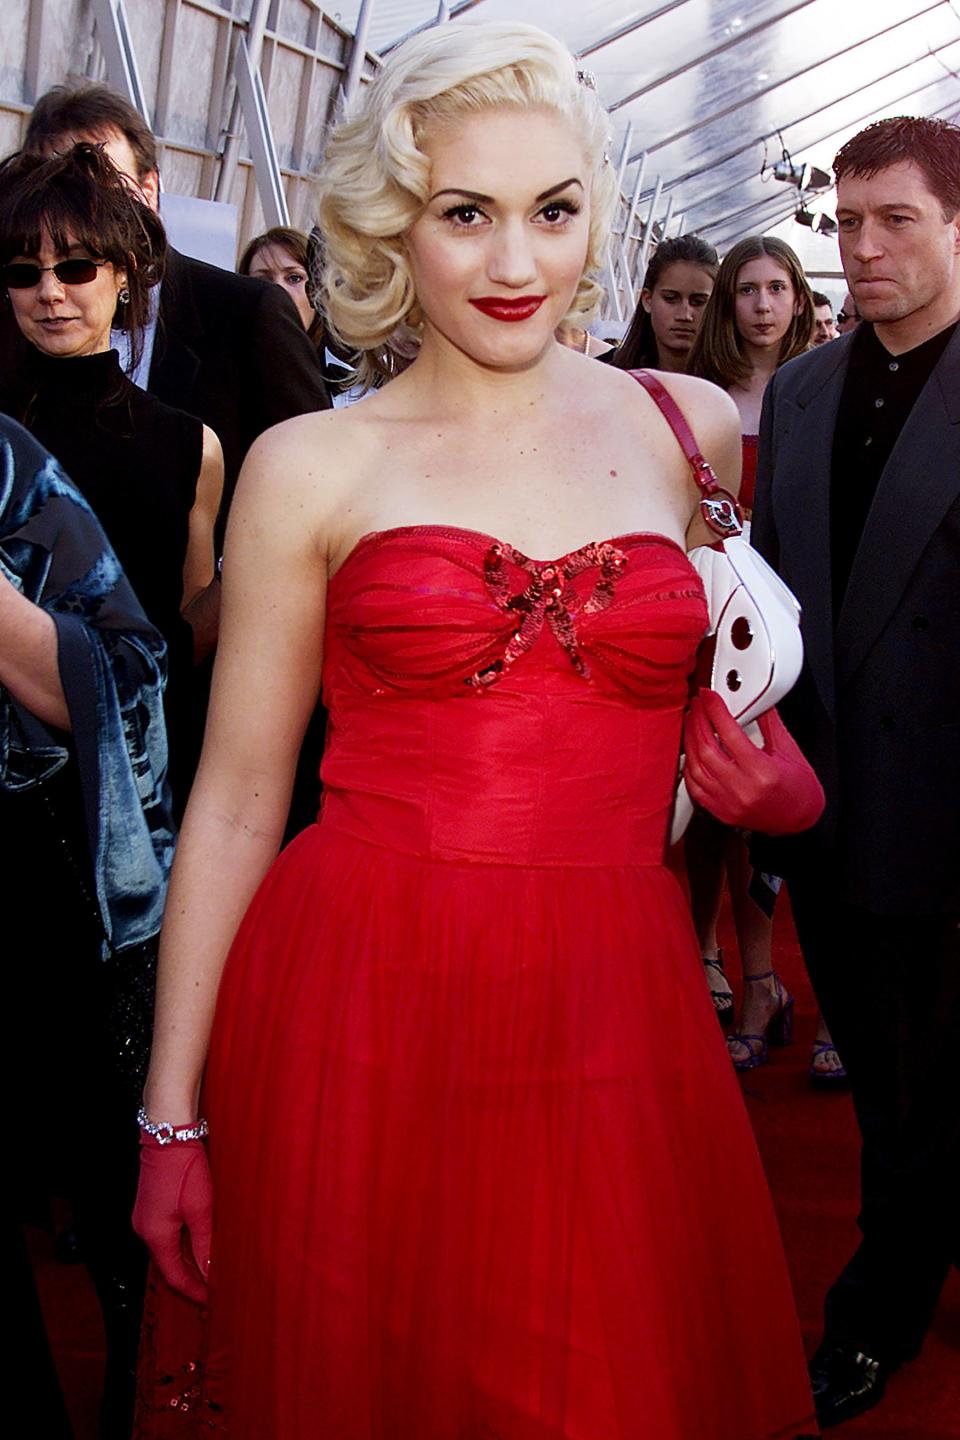 Is that Marilyn Monroe or Gwen Stefani? This photo from the 2001 Grammy Awards made us do a double-take.